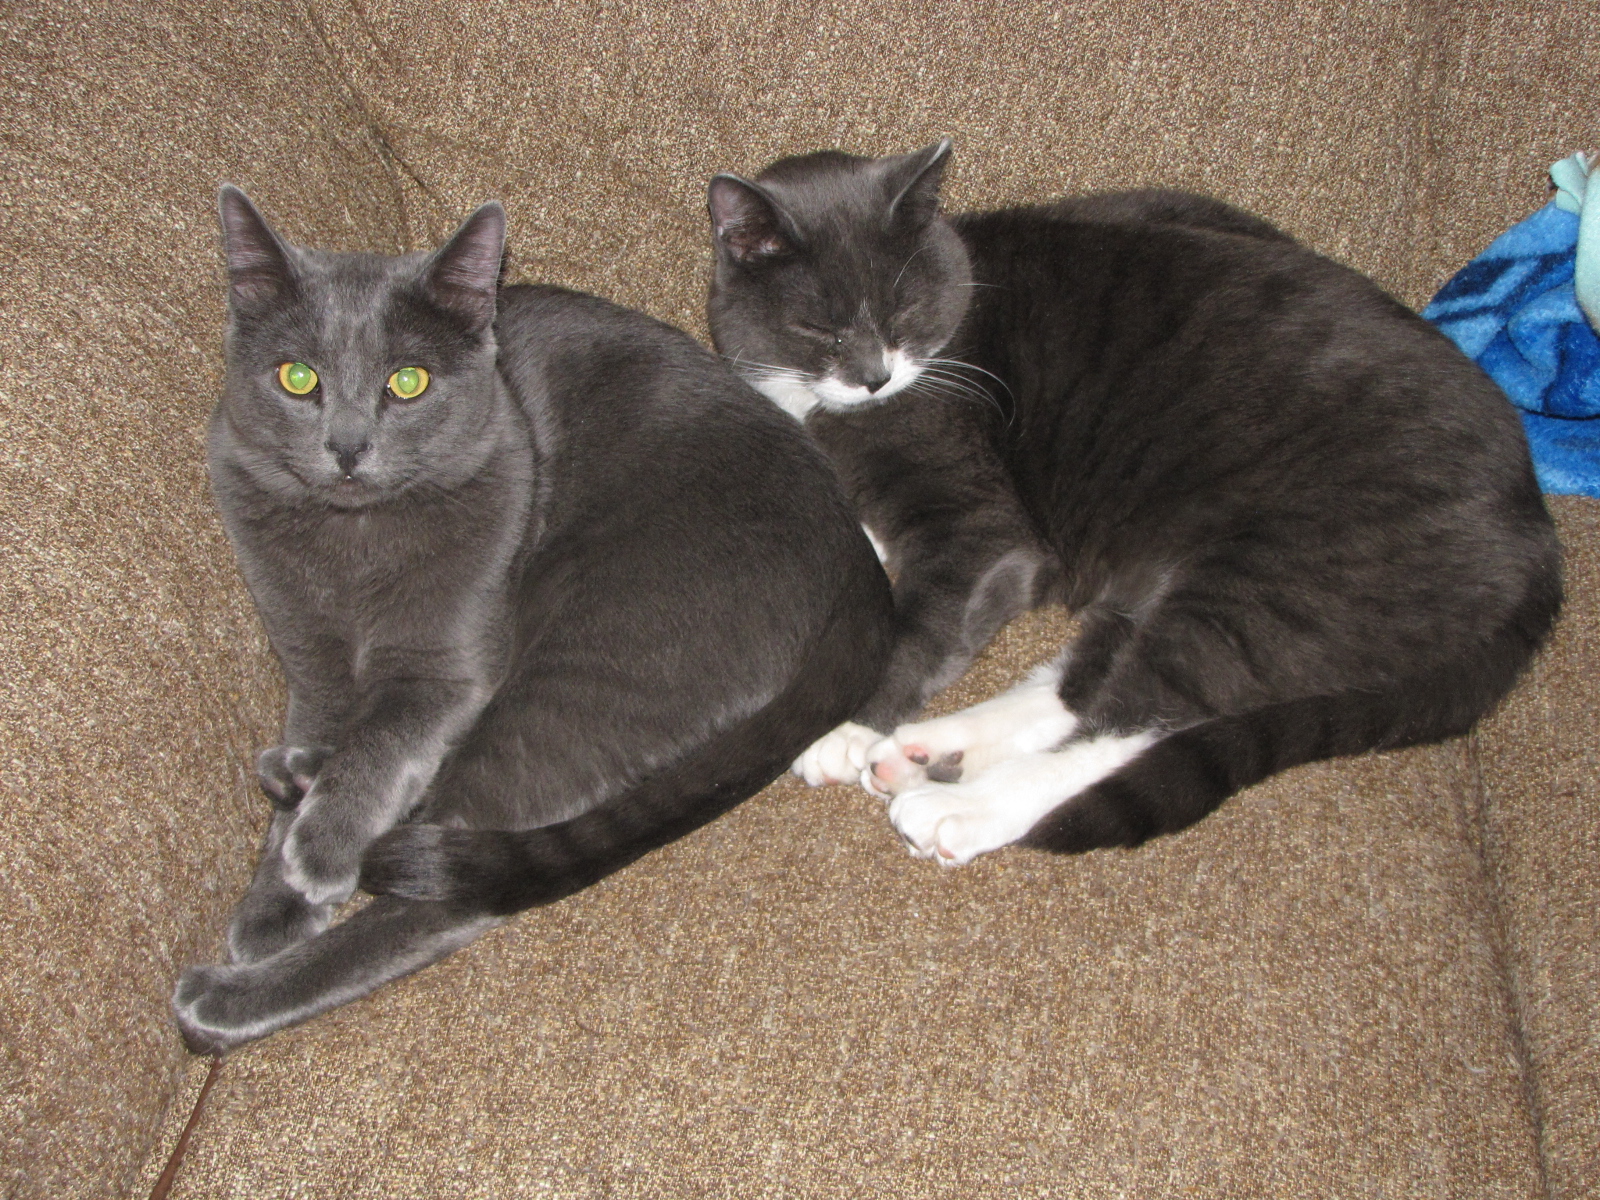 Thor and Velcro snuggling!